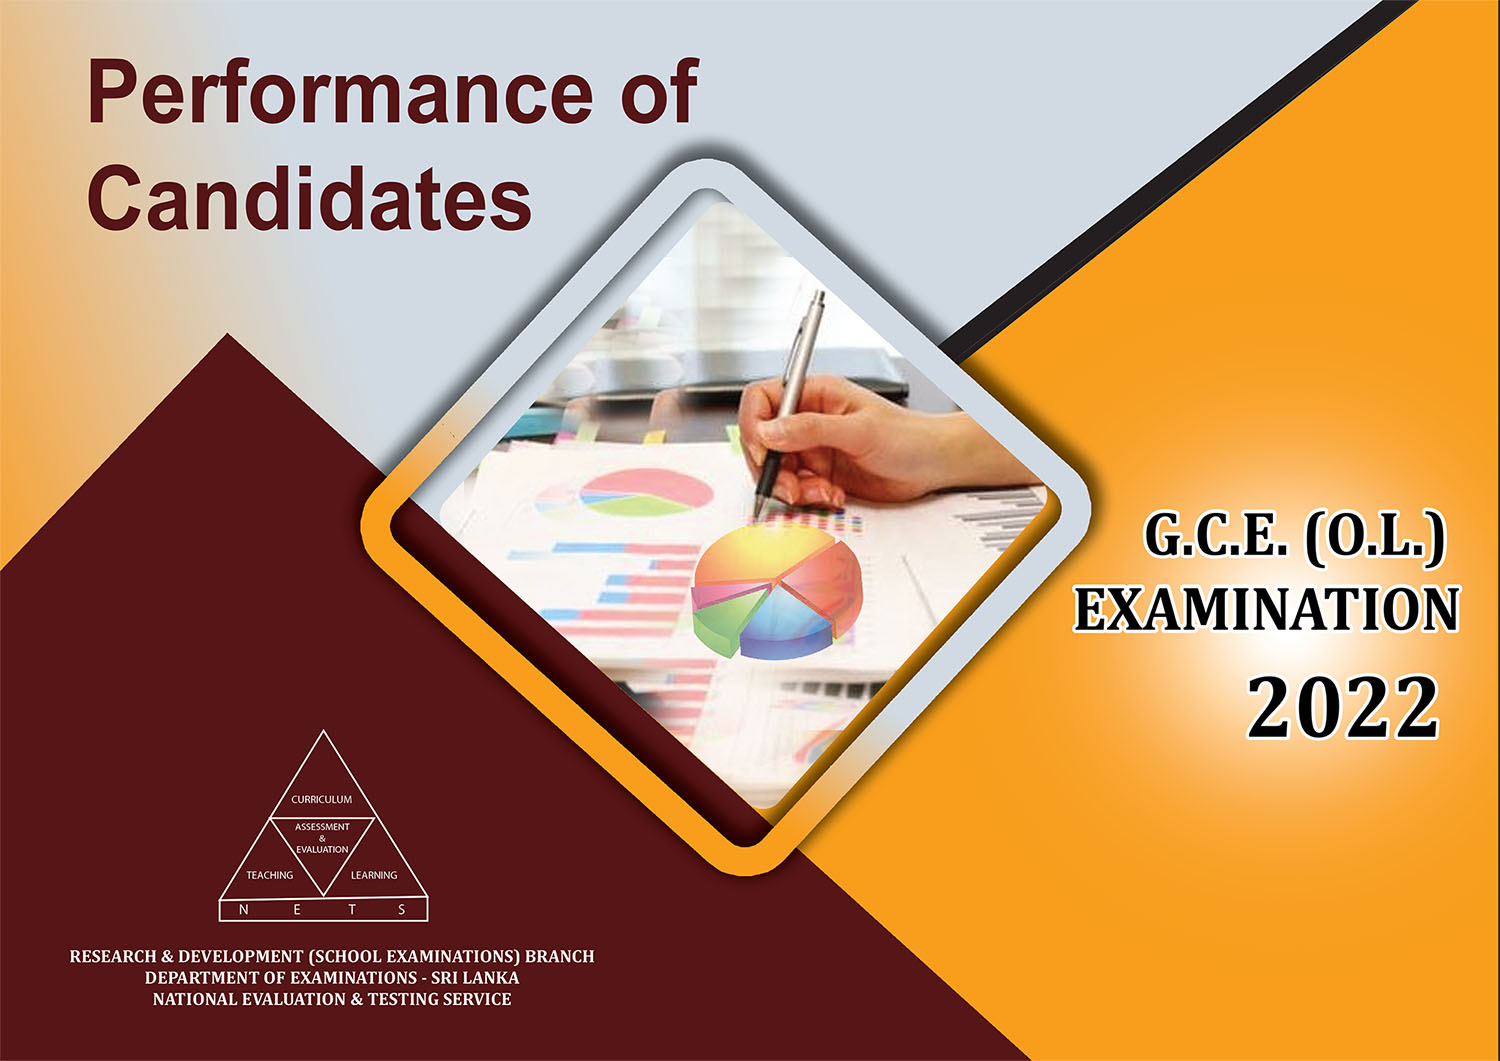 Statistical Reports (Performance of Candidates) - G.C.E. O/L Examination 2022 (2023)